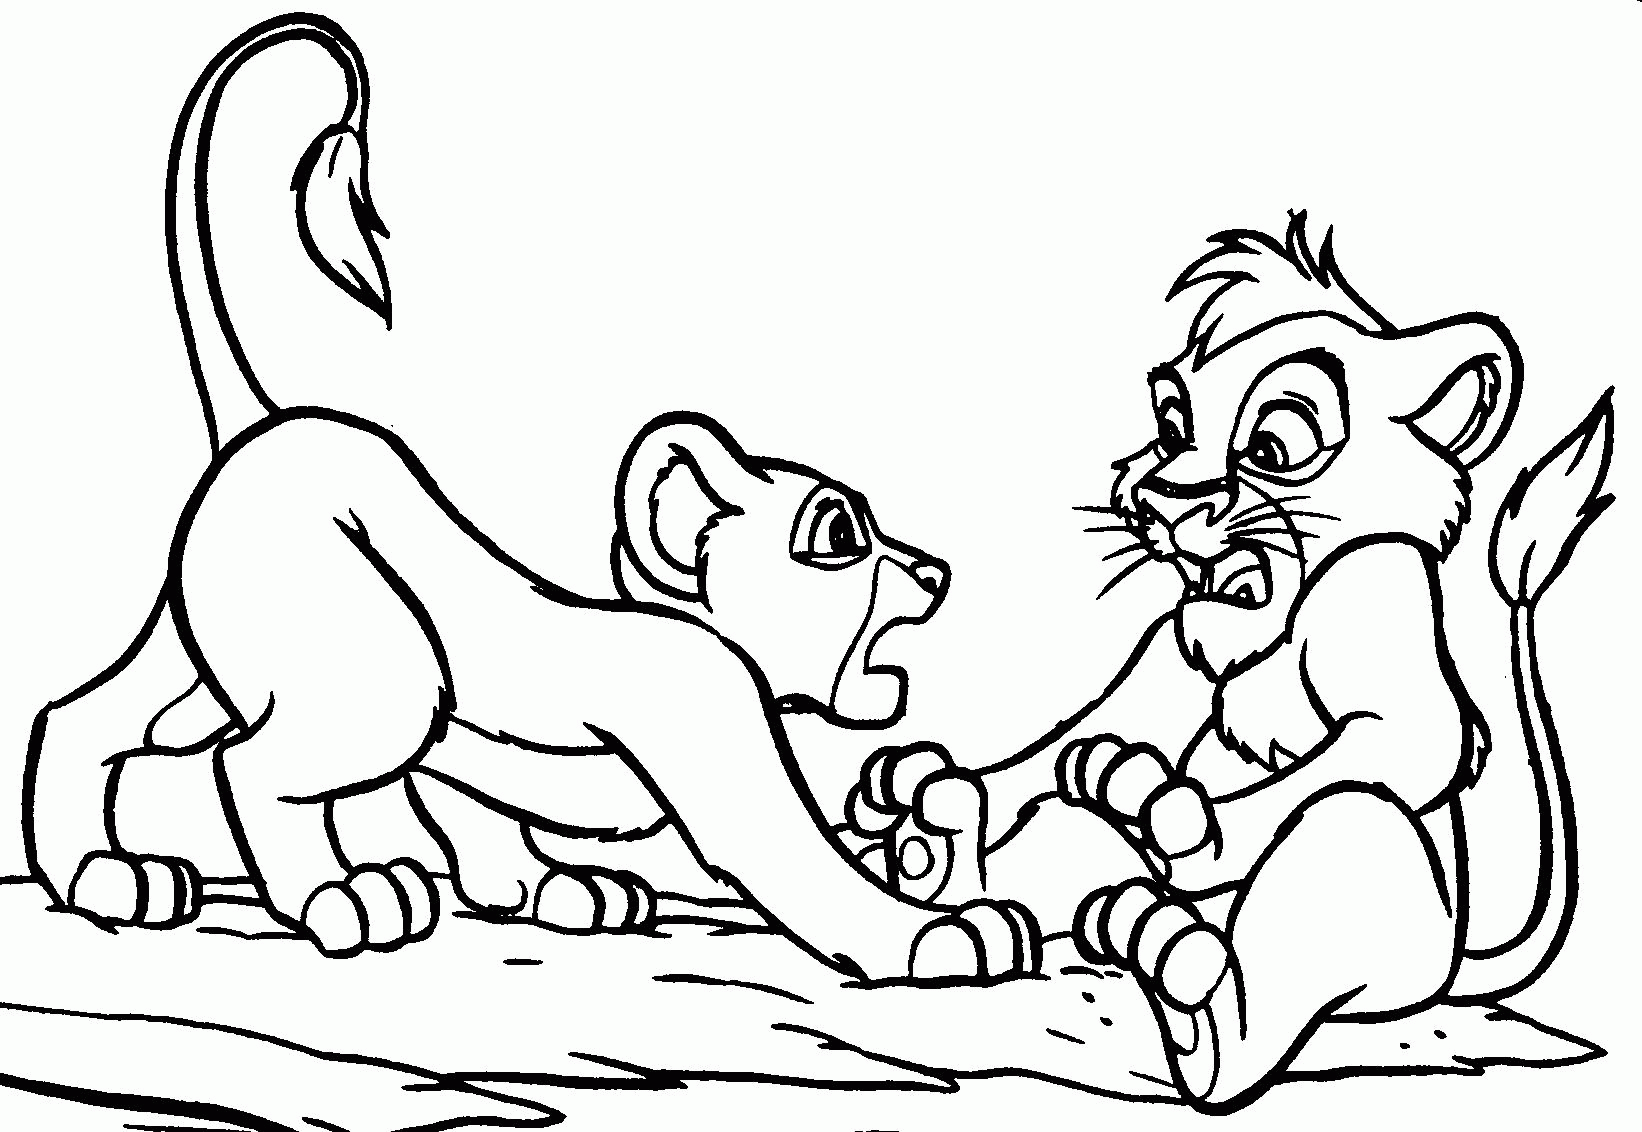 Coloring Pages Of The Lion King 2 | High Quality Coloring Pages